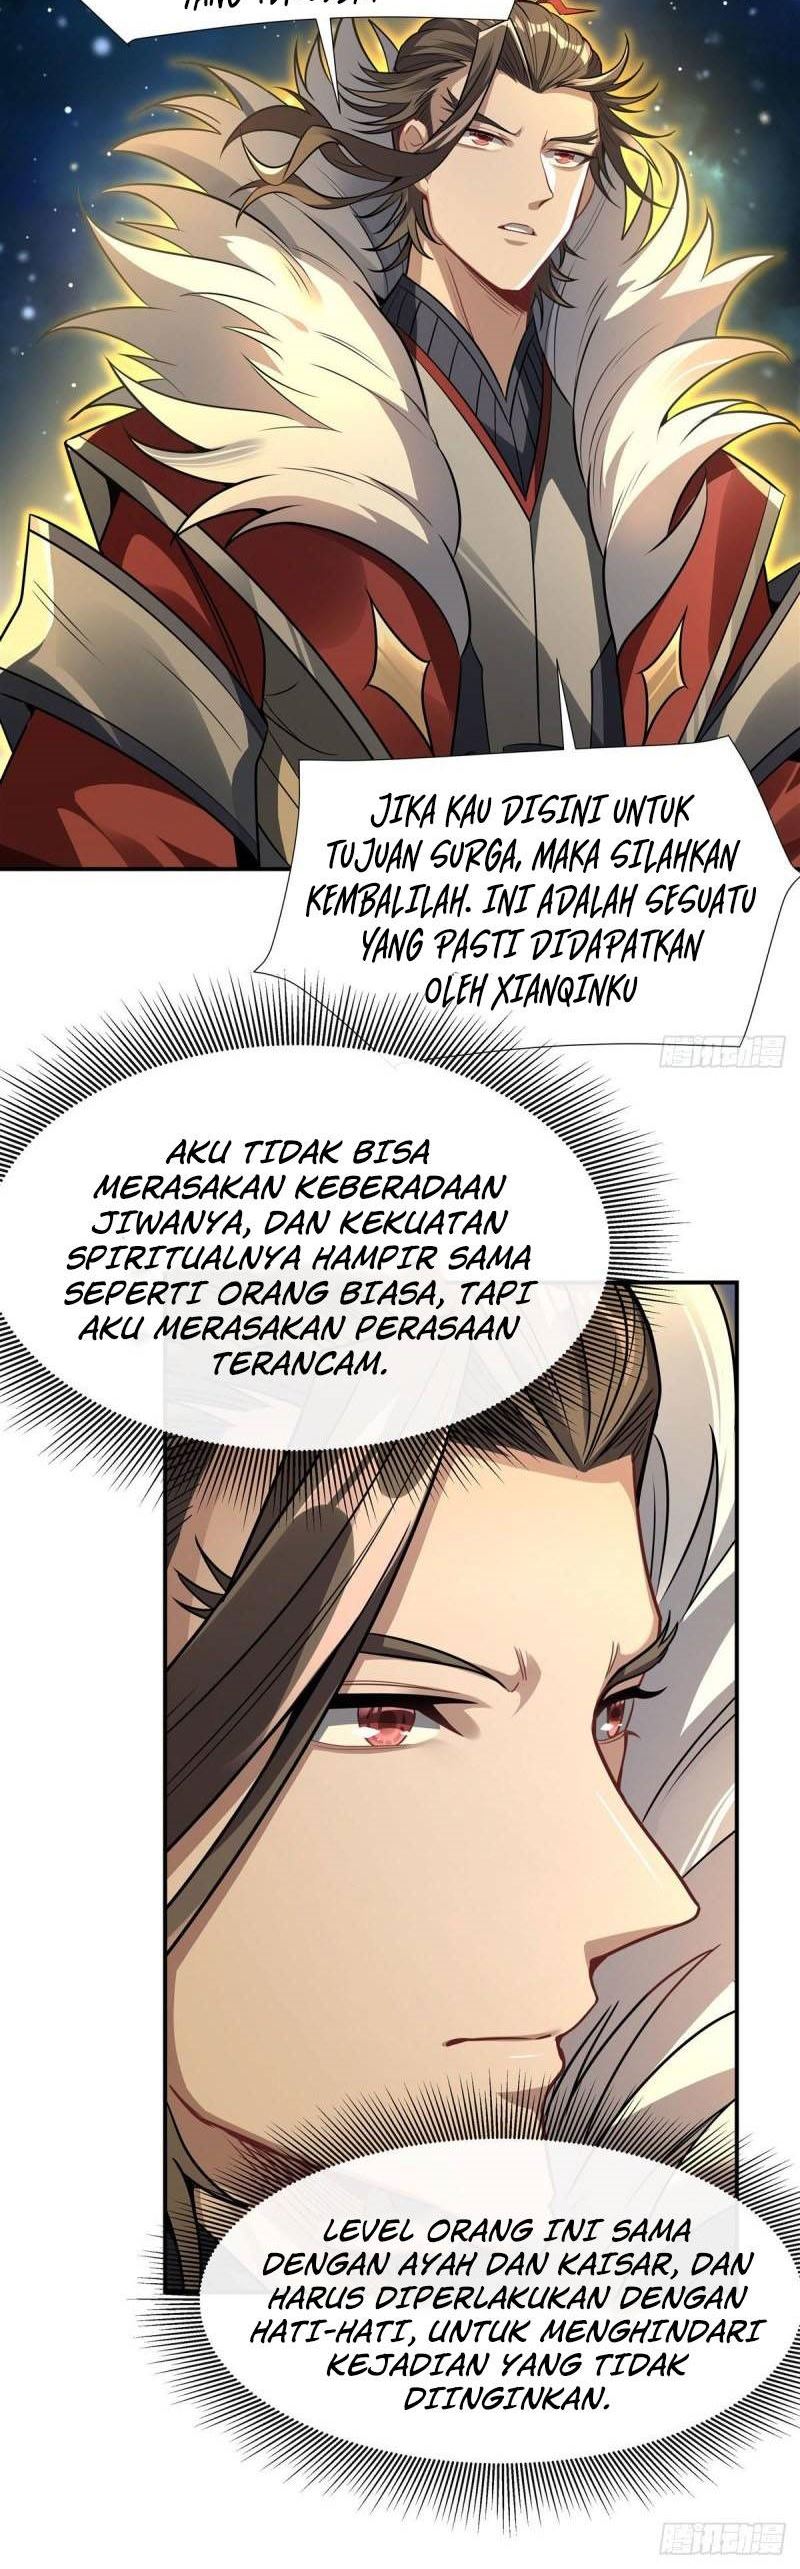 Dilarang COPAS - situs resmi www.mangacanblog.com - Komik my female apprentices are all big shots from the future 078 - chapter 78 79 Indonesia my female apprentices are all big shots from the future 078 - chapter 78 Terbaru 16|Baca Manga Komik Indonesia|Mangacan